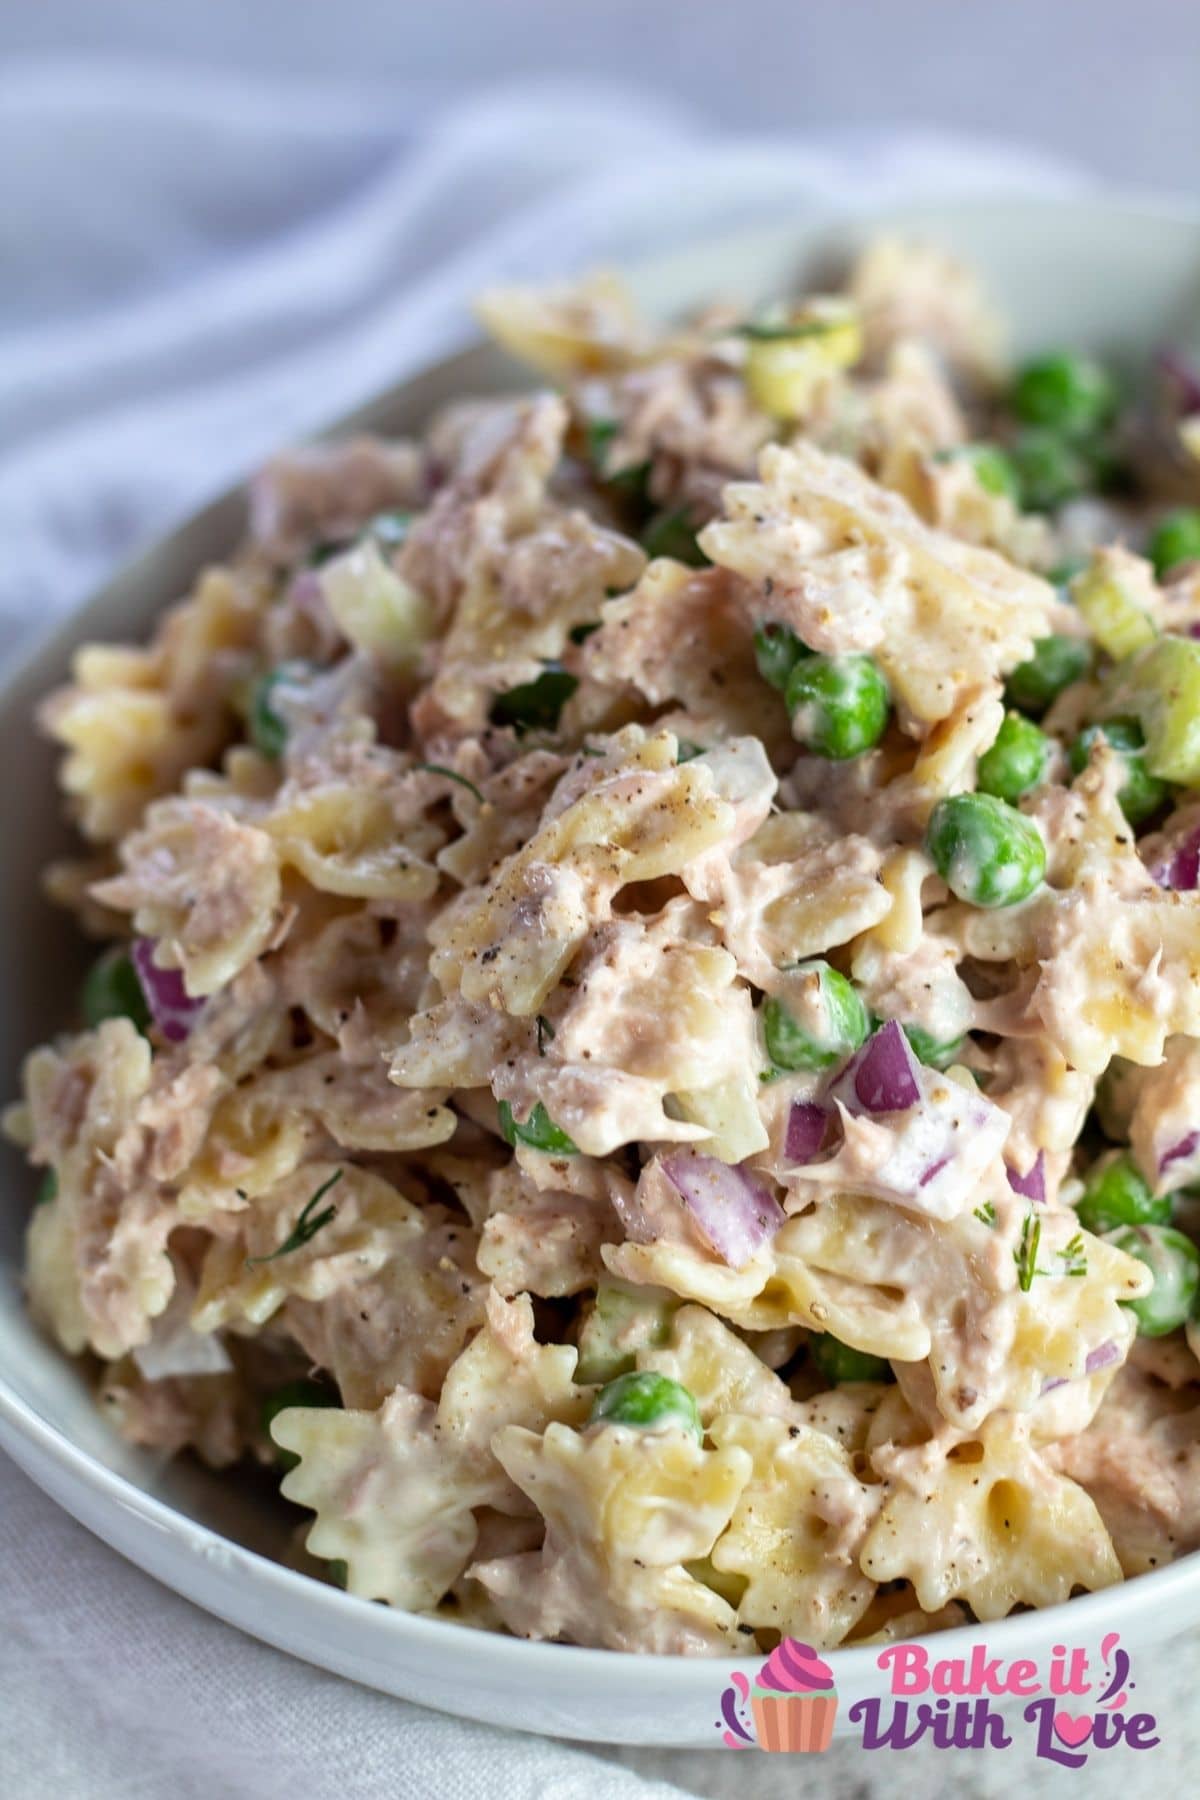 Tall image of the tuna salad with pasta in white bowl.